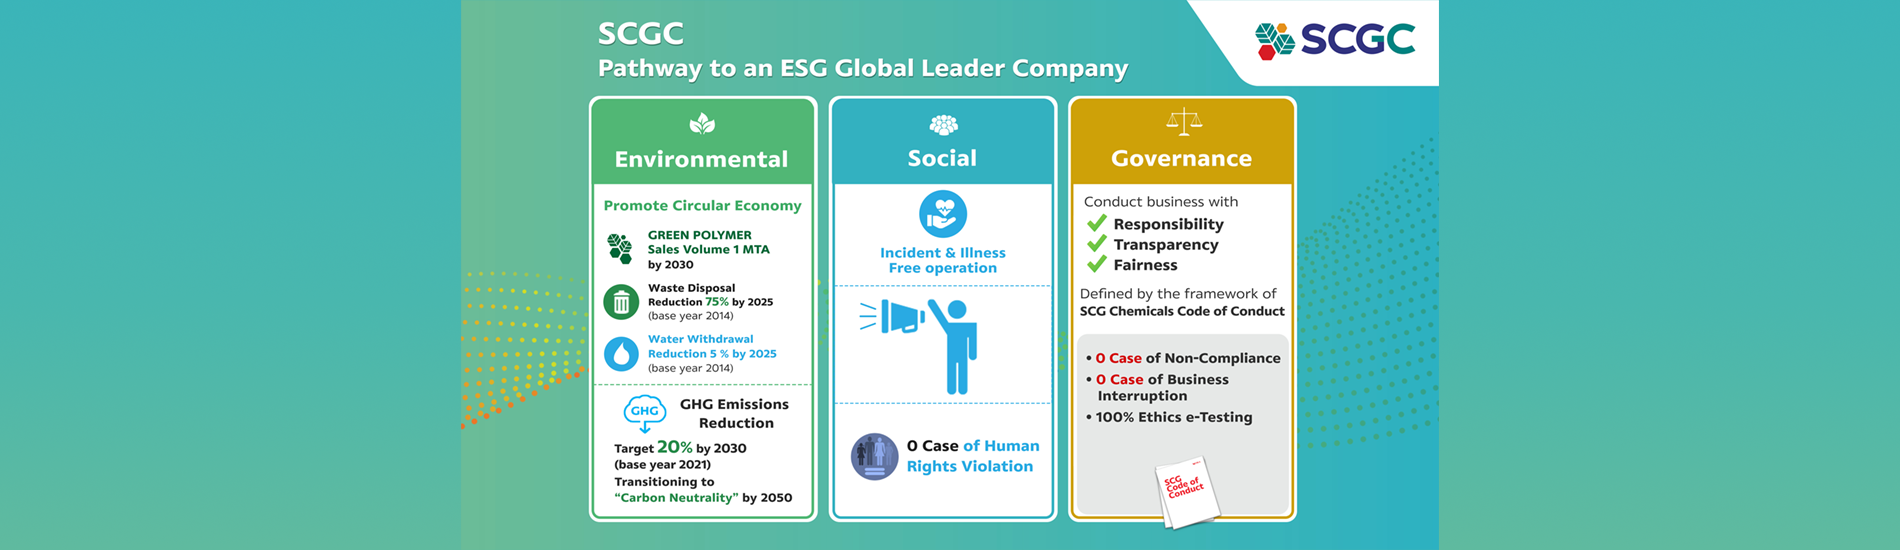 SCGC announces ESG Targets for a Sustainable World